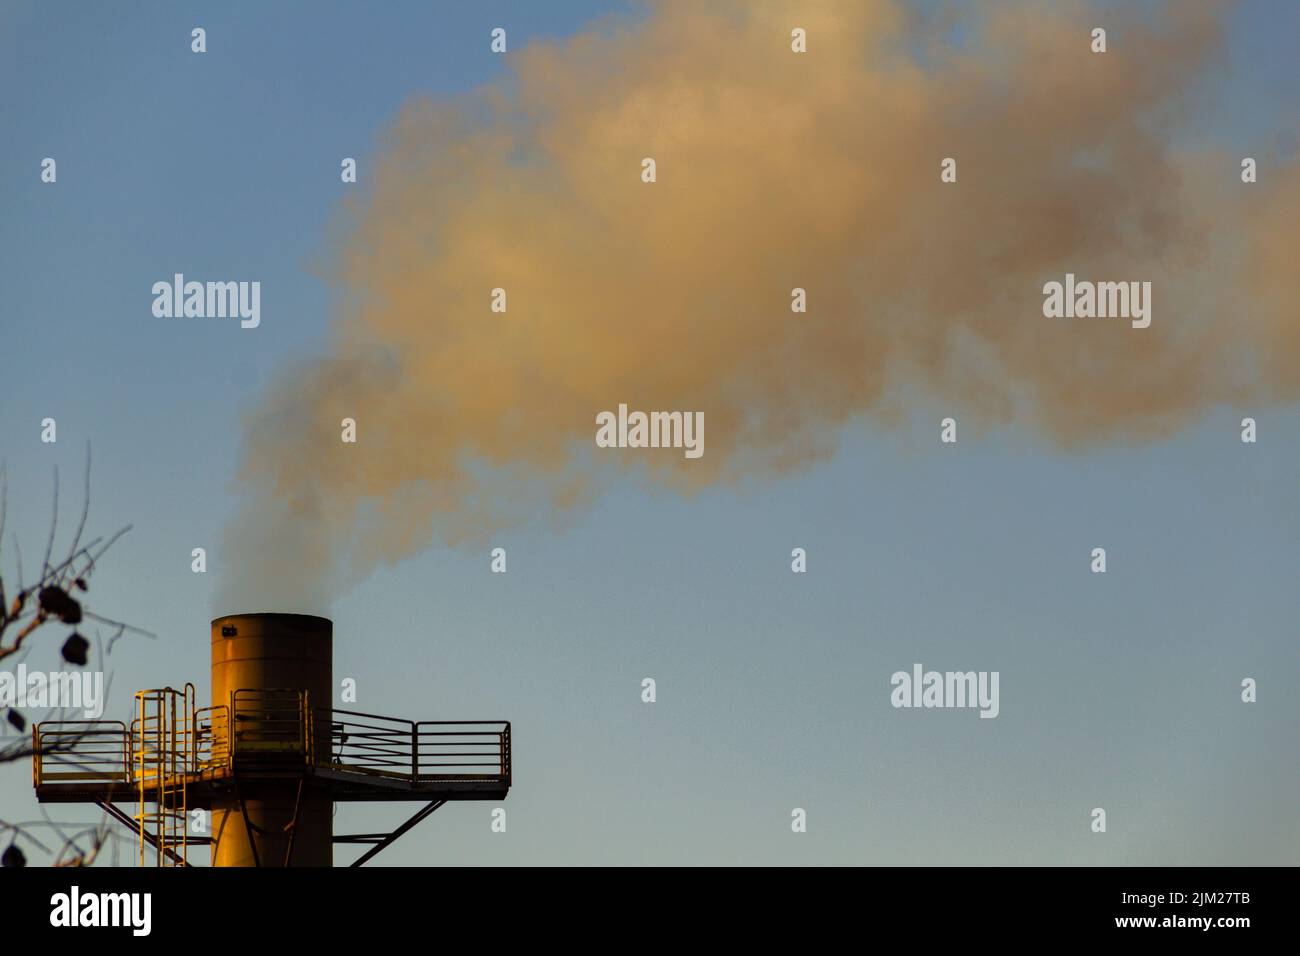 Goiania, Goiás, Brazil – August 04, 2022: Smoke coming out of a factory chimney. Factory smoke pollution with the sky in the background. Stock Photo